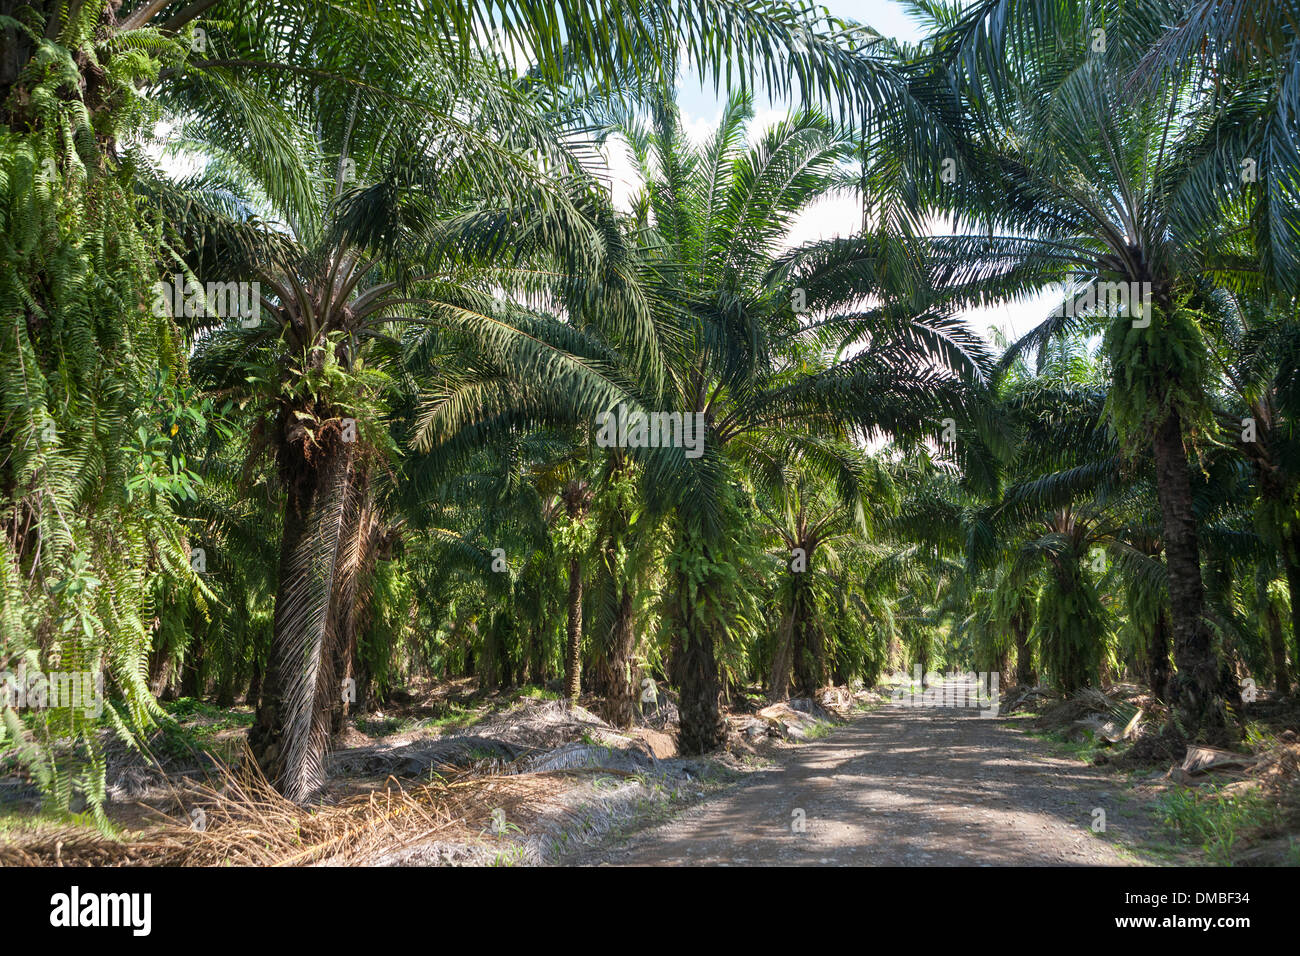 African palm plantations in Costa Rica. Native to West Africa, Elaeis guineensis was planted in the 1940s by United Fruit Co. Stock Photo